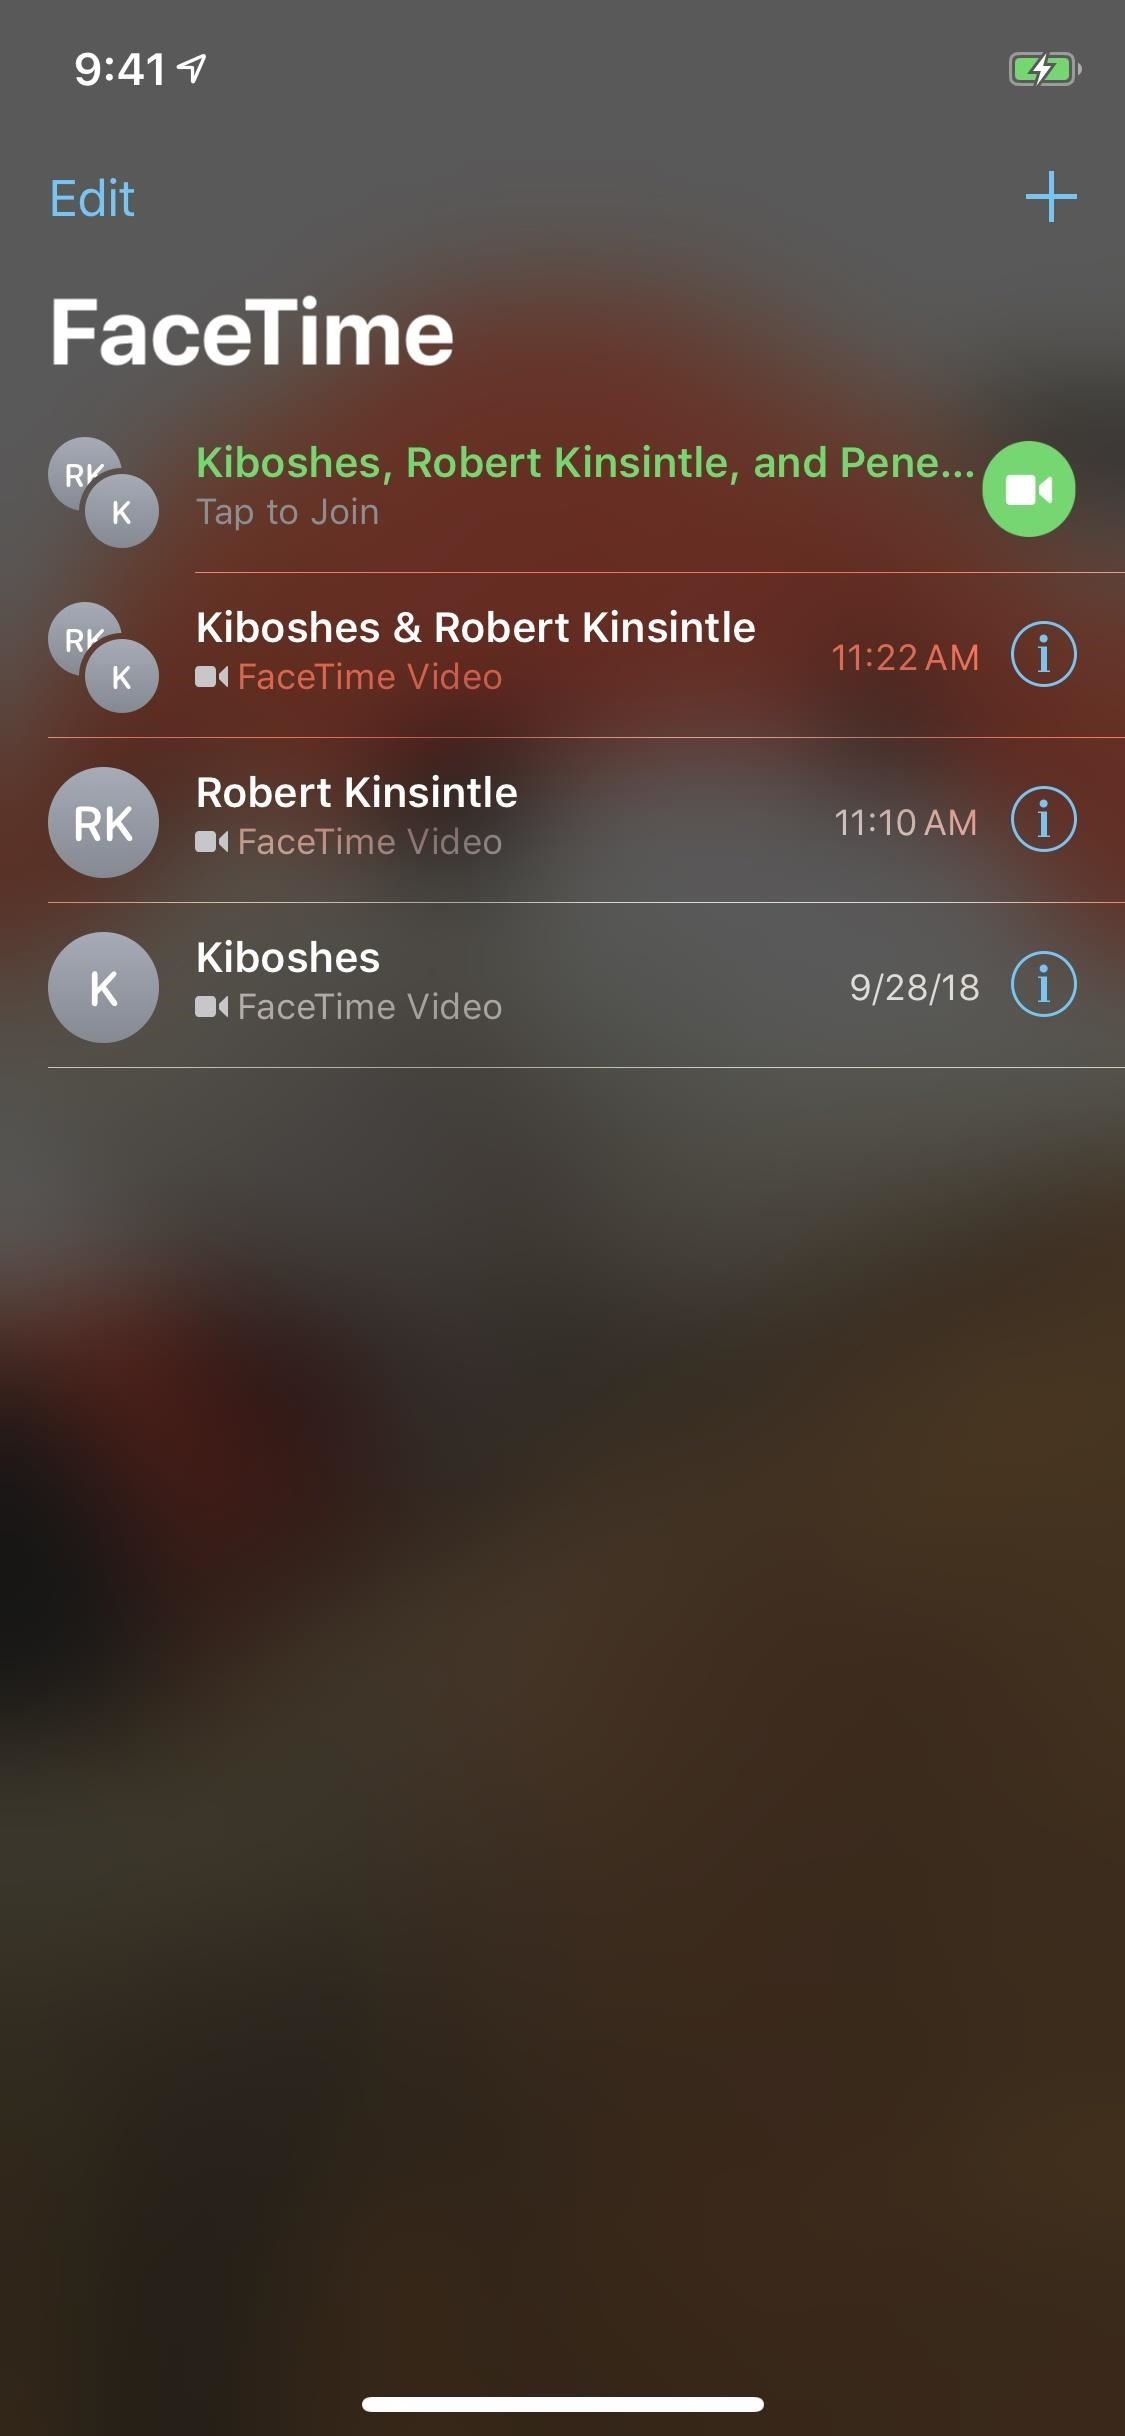 How to Use FaceTime's Group Chat on Your iPhone to Talk to More Than One Person at a Time